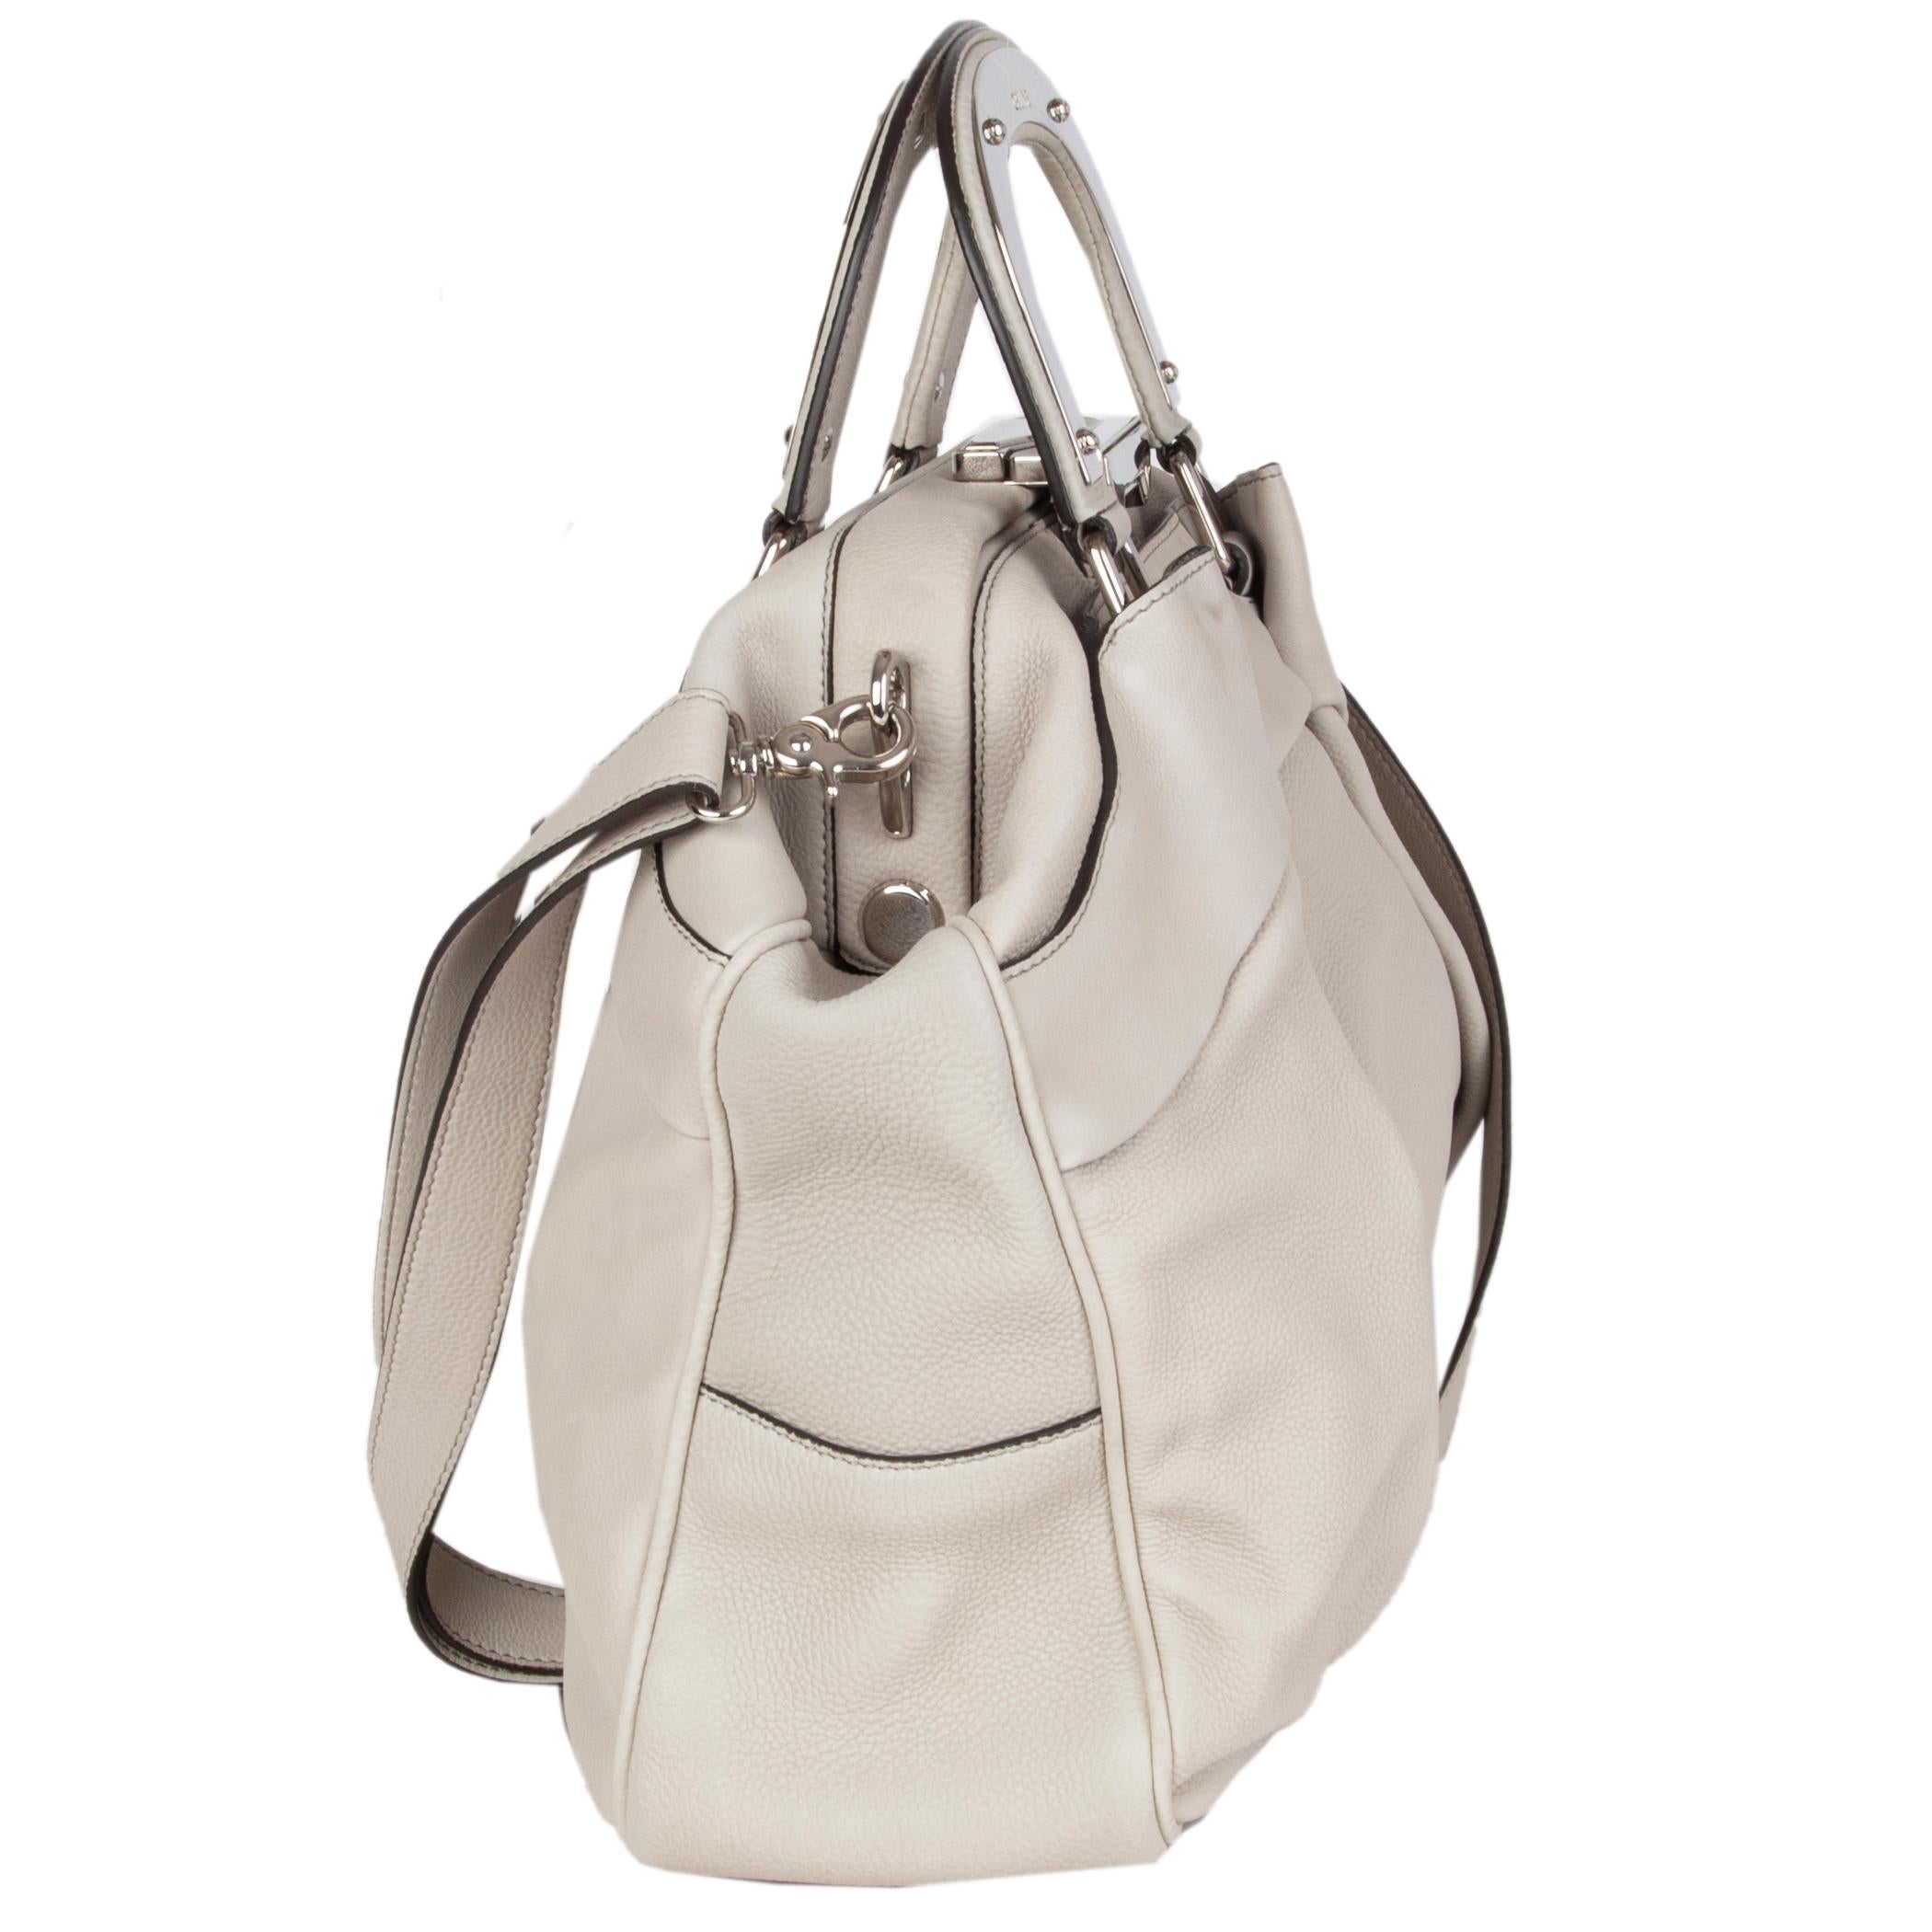 Celine docotors bag in pale grey grained soft leather. Adjustable and detachable shoulder strap. Magnetic-snap pocket on the outside front. Closes with a lock and frame. Lined in black canvas with two open pockets against the front and a zipper